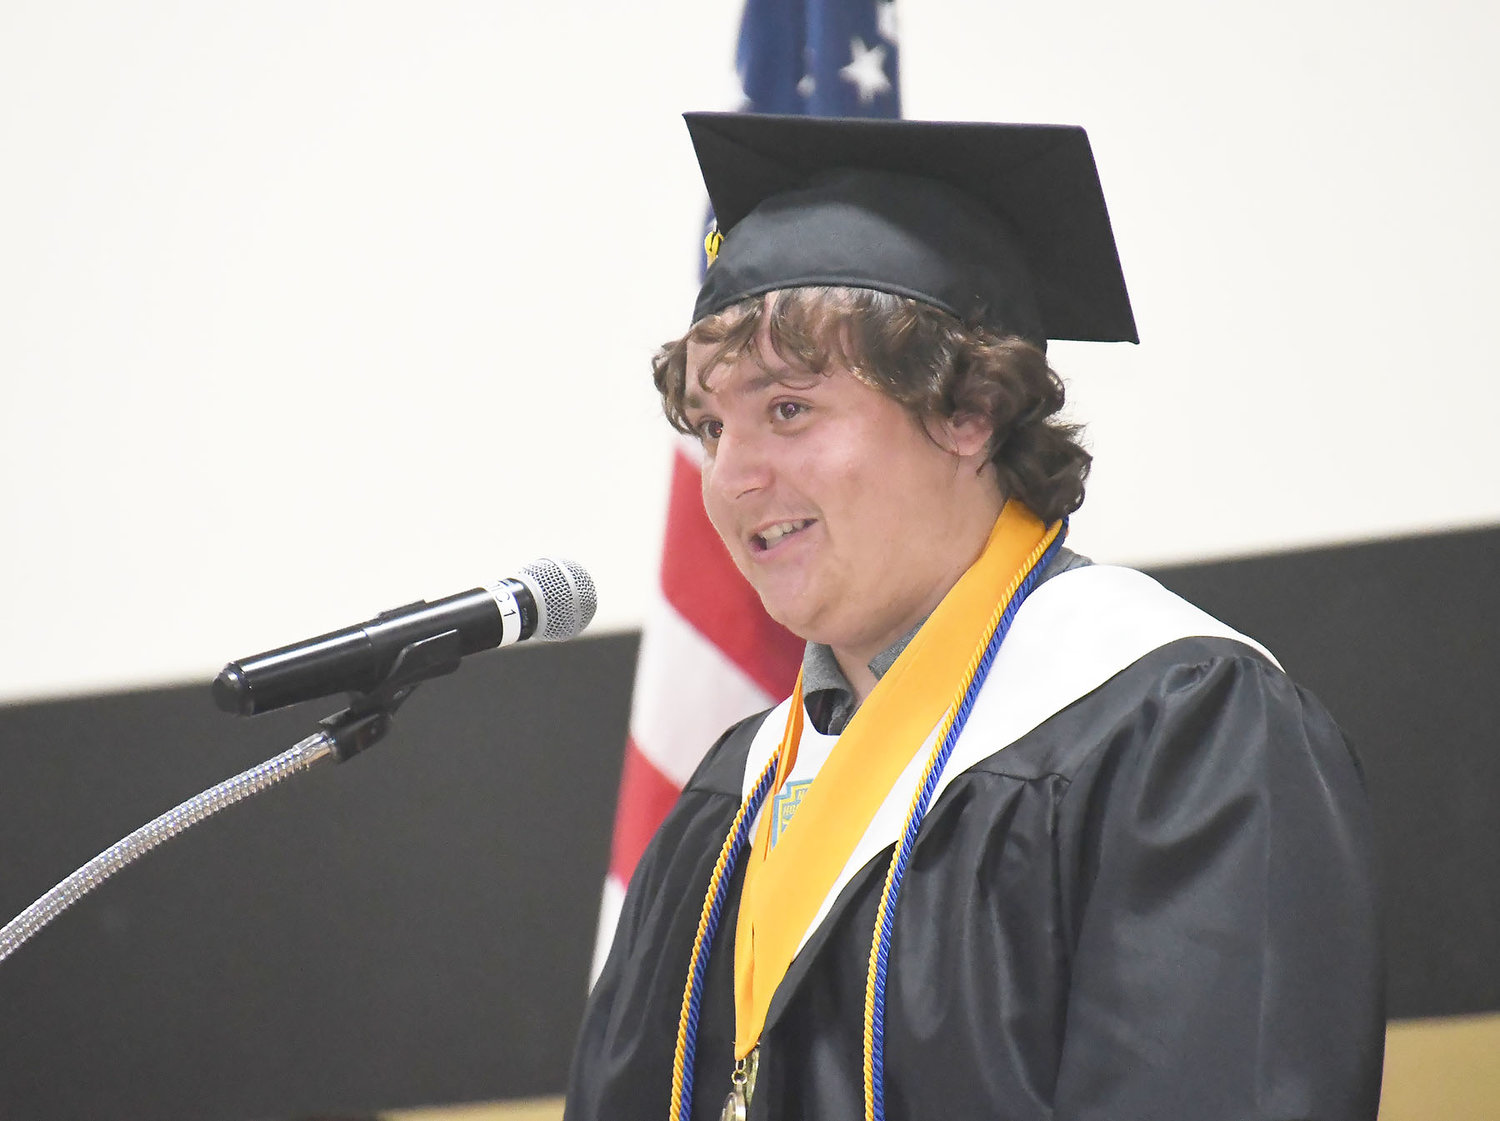 Class of 2022 graduate Conner Adams and co-salutatorian presents his speech during Sunday's commencement ceremony. Adams plans on attending Moberly Area Community College.